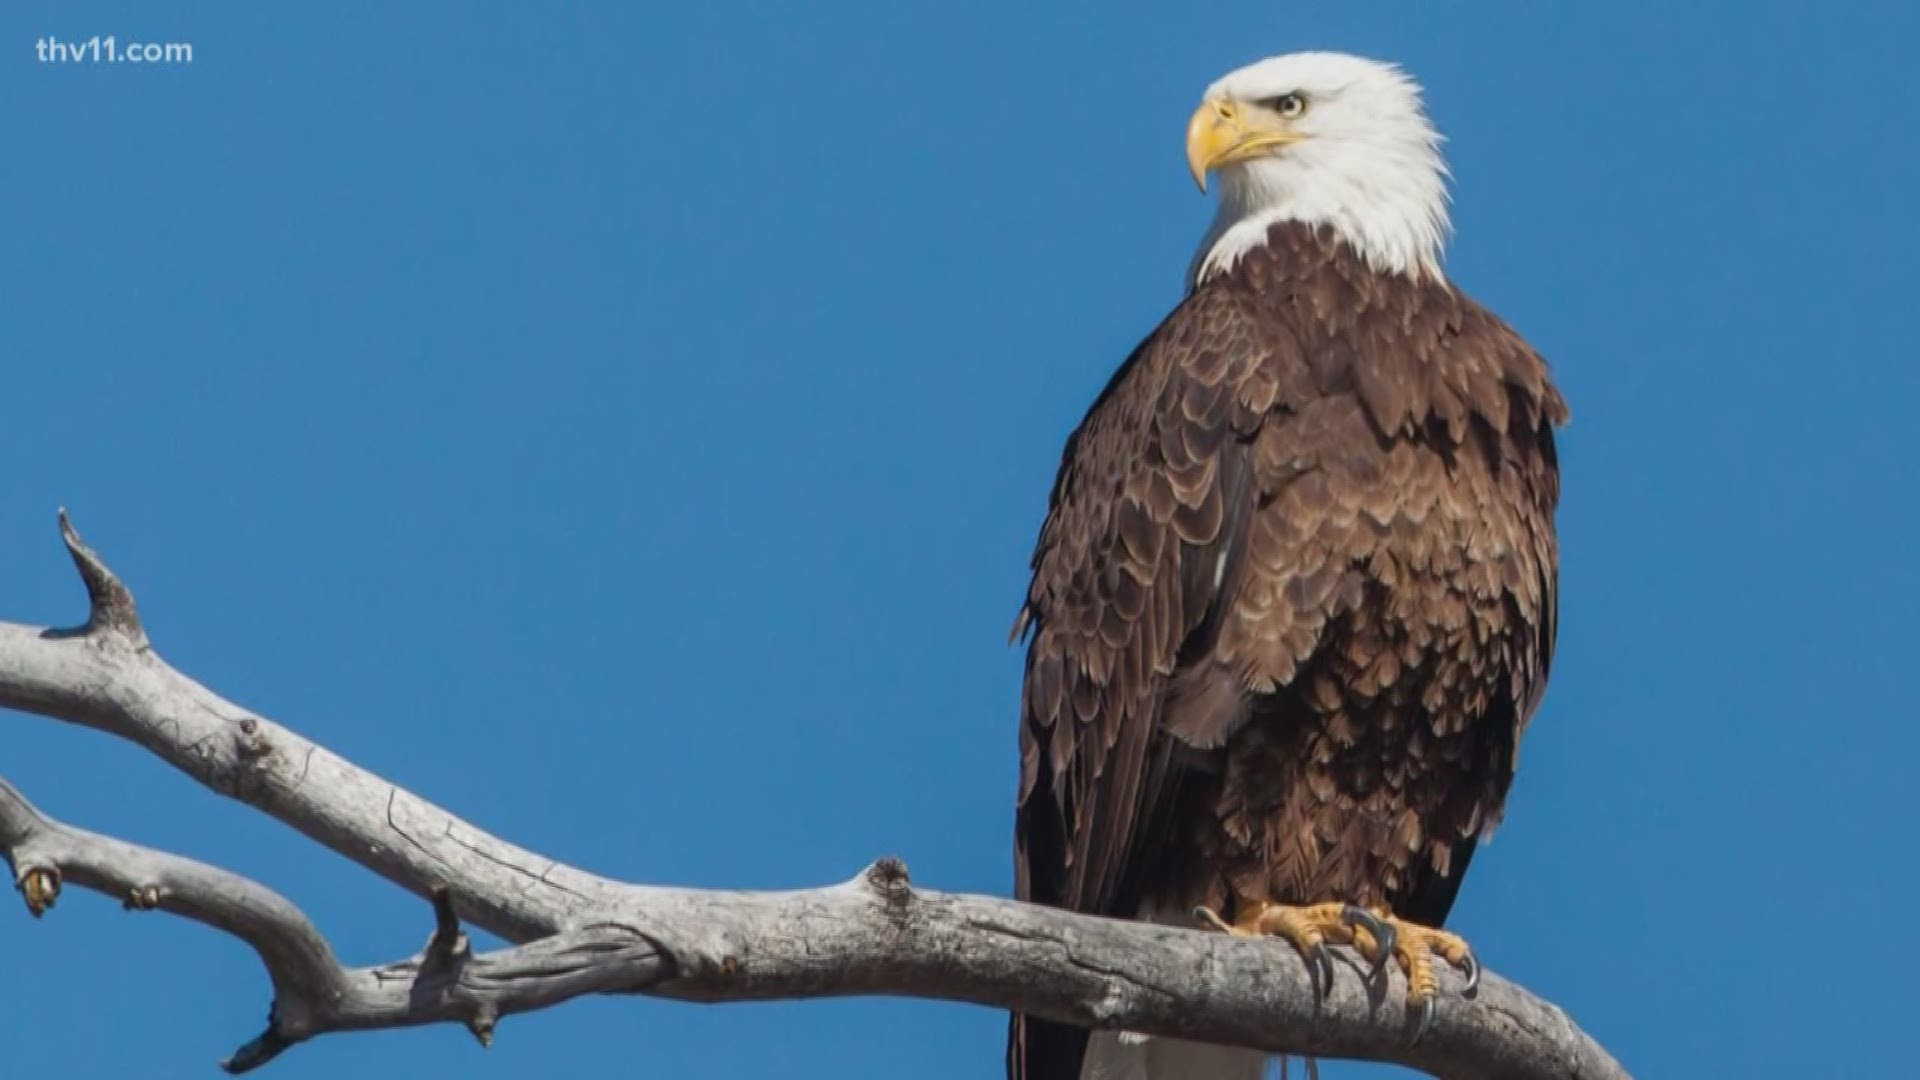 In 2007, the bald eagle was removed from the federal list of threatened and endangered species, but one viewer wants to know how the population is doing in Arkansas.